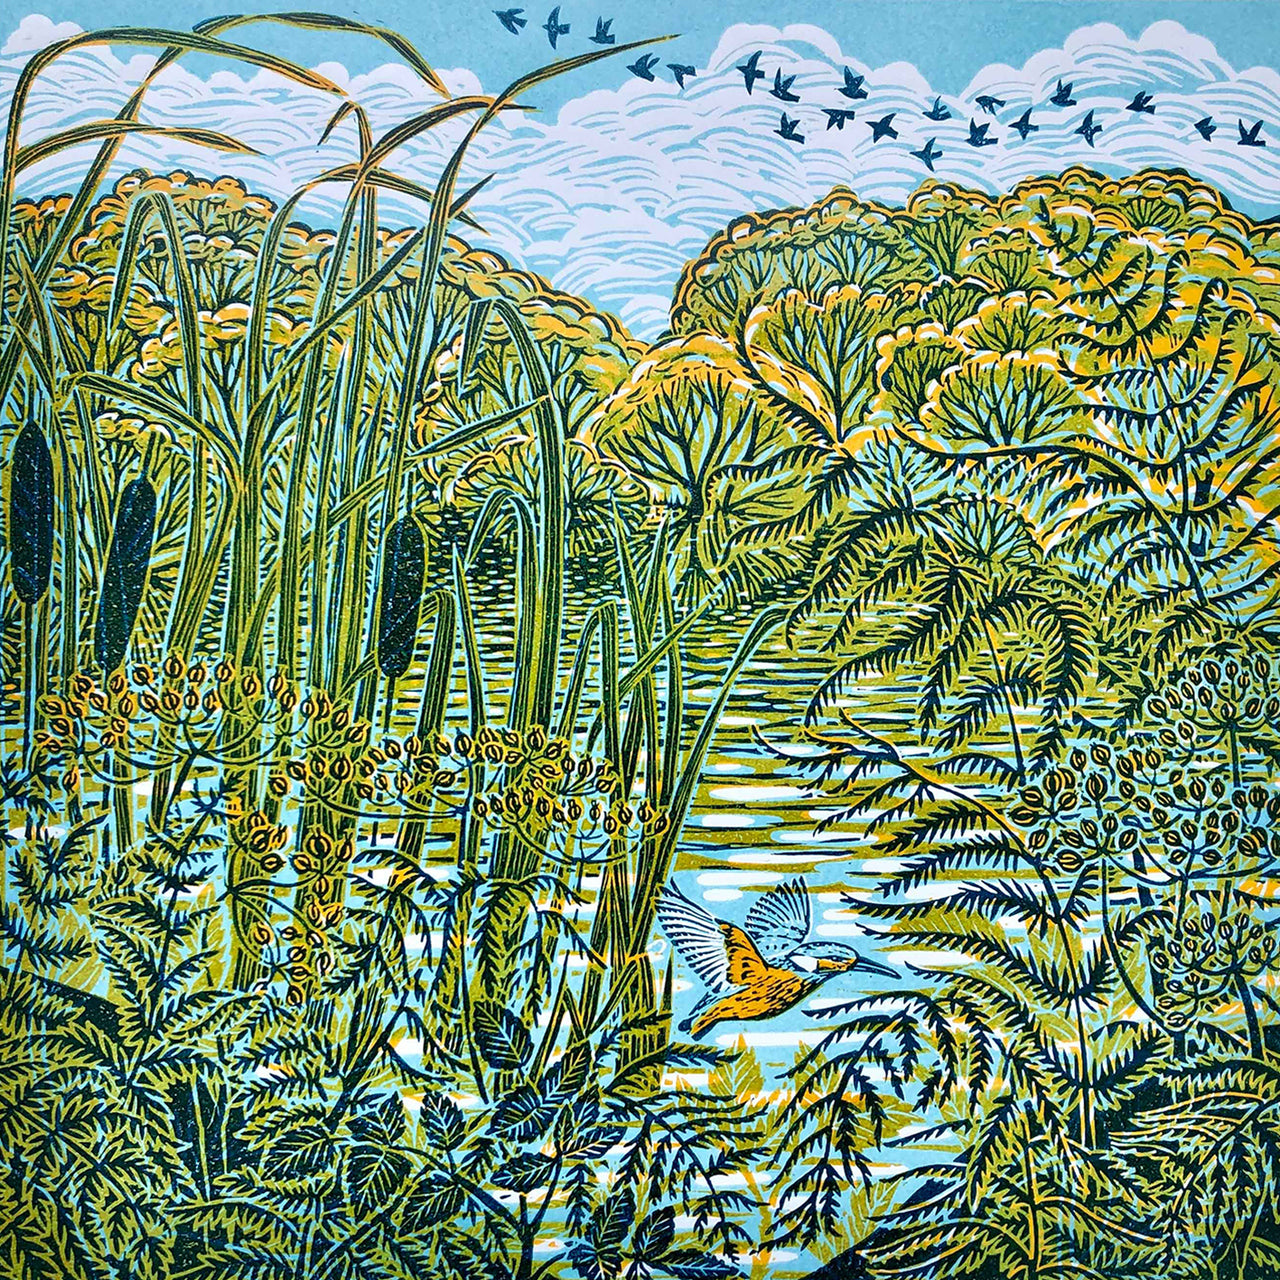 Cornish artist Claire Armitage, lino print with foliage and bull rush in the foreground with water and trees and sky in background.